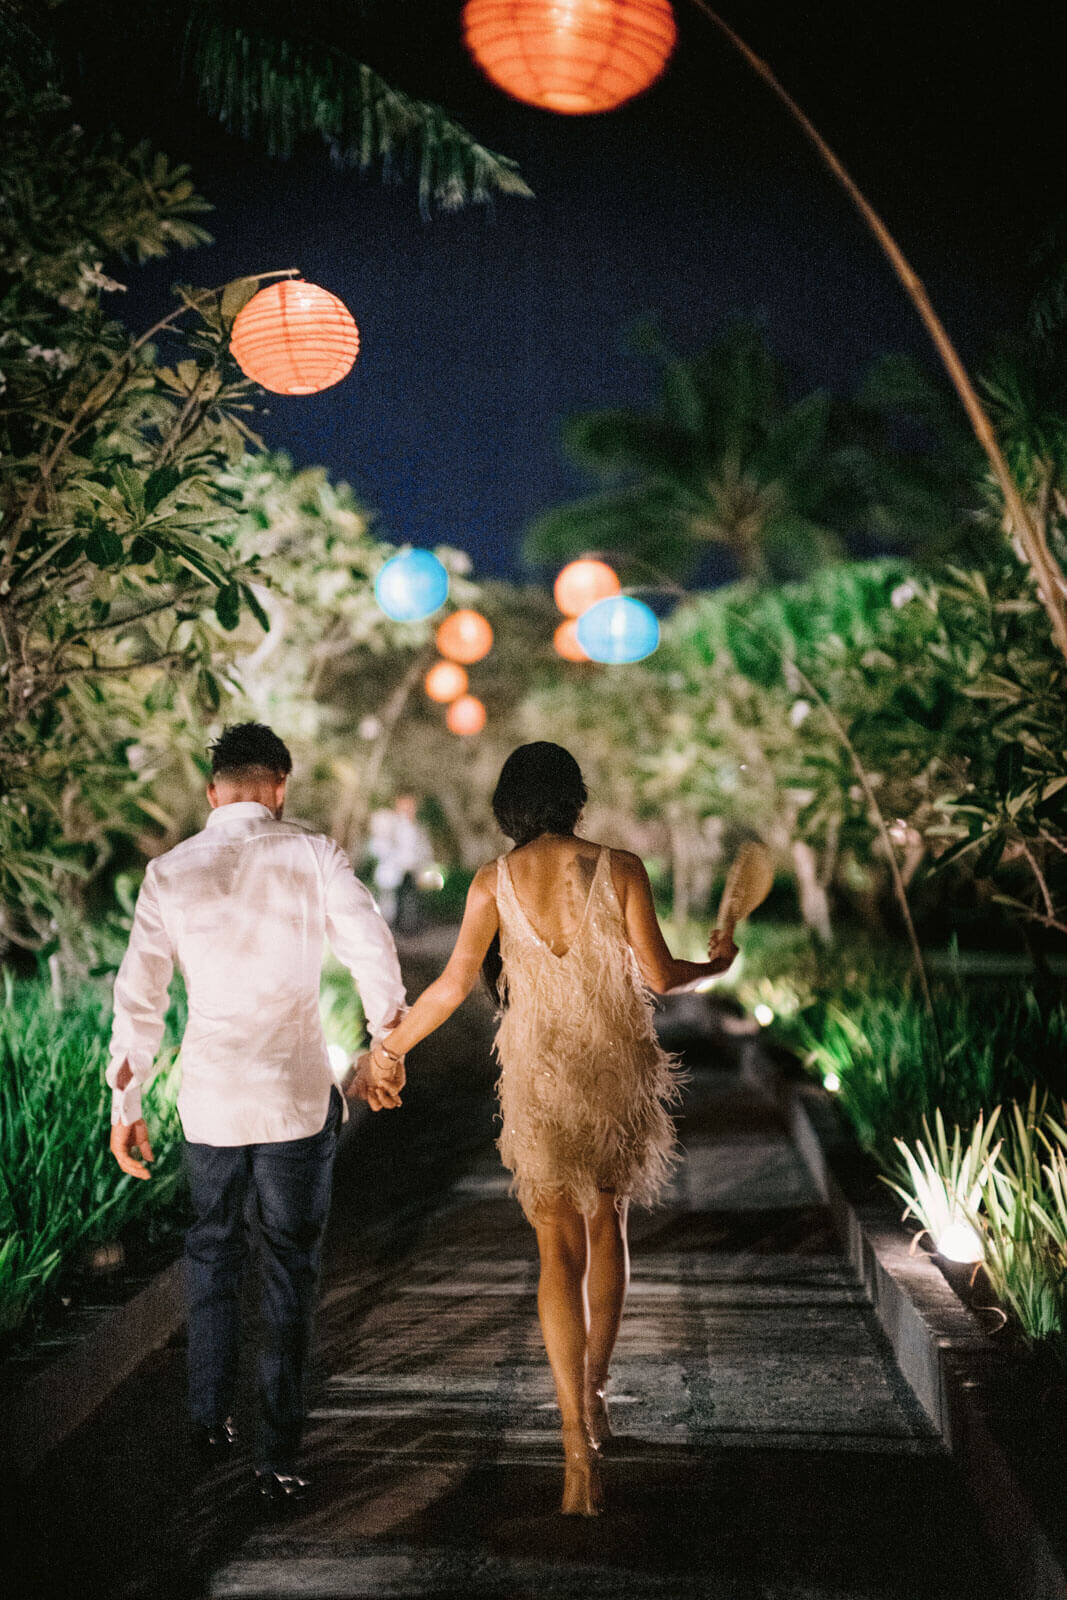 The bride and groom are walking away in a garden path, after the party in Khayangan Estate, Bali, Indonesia. Image by Jenny Fu Studio